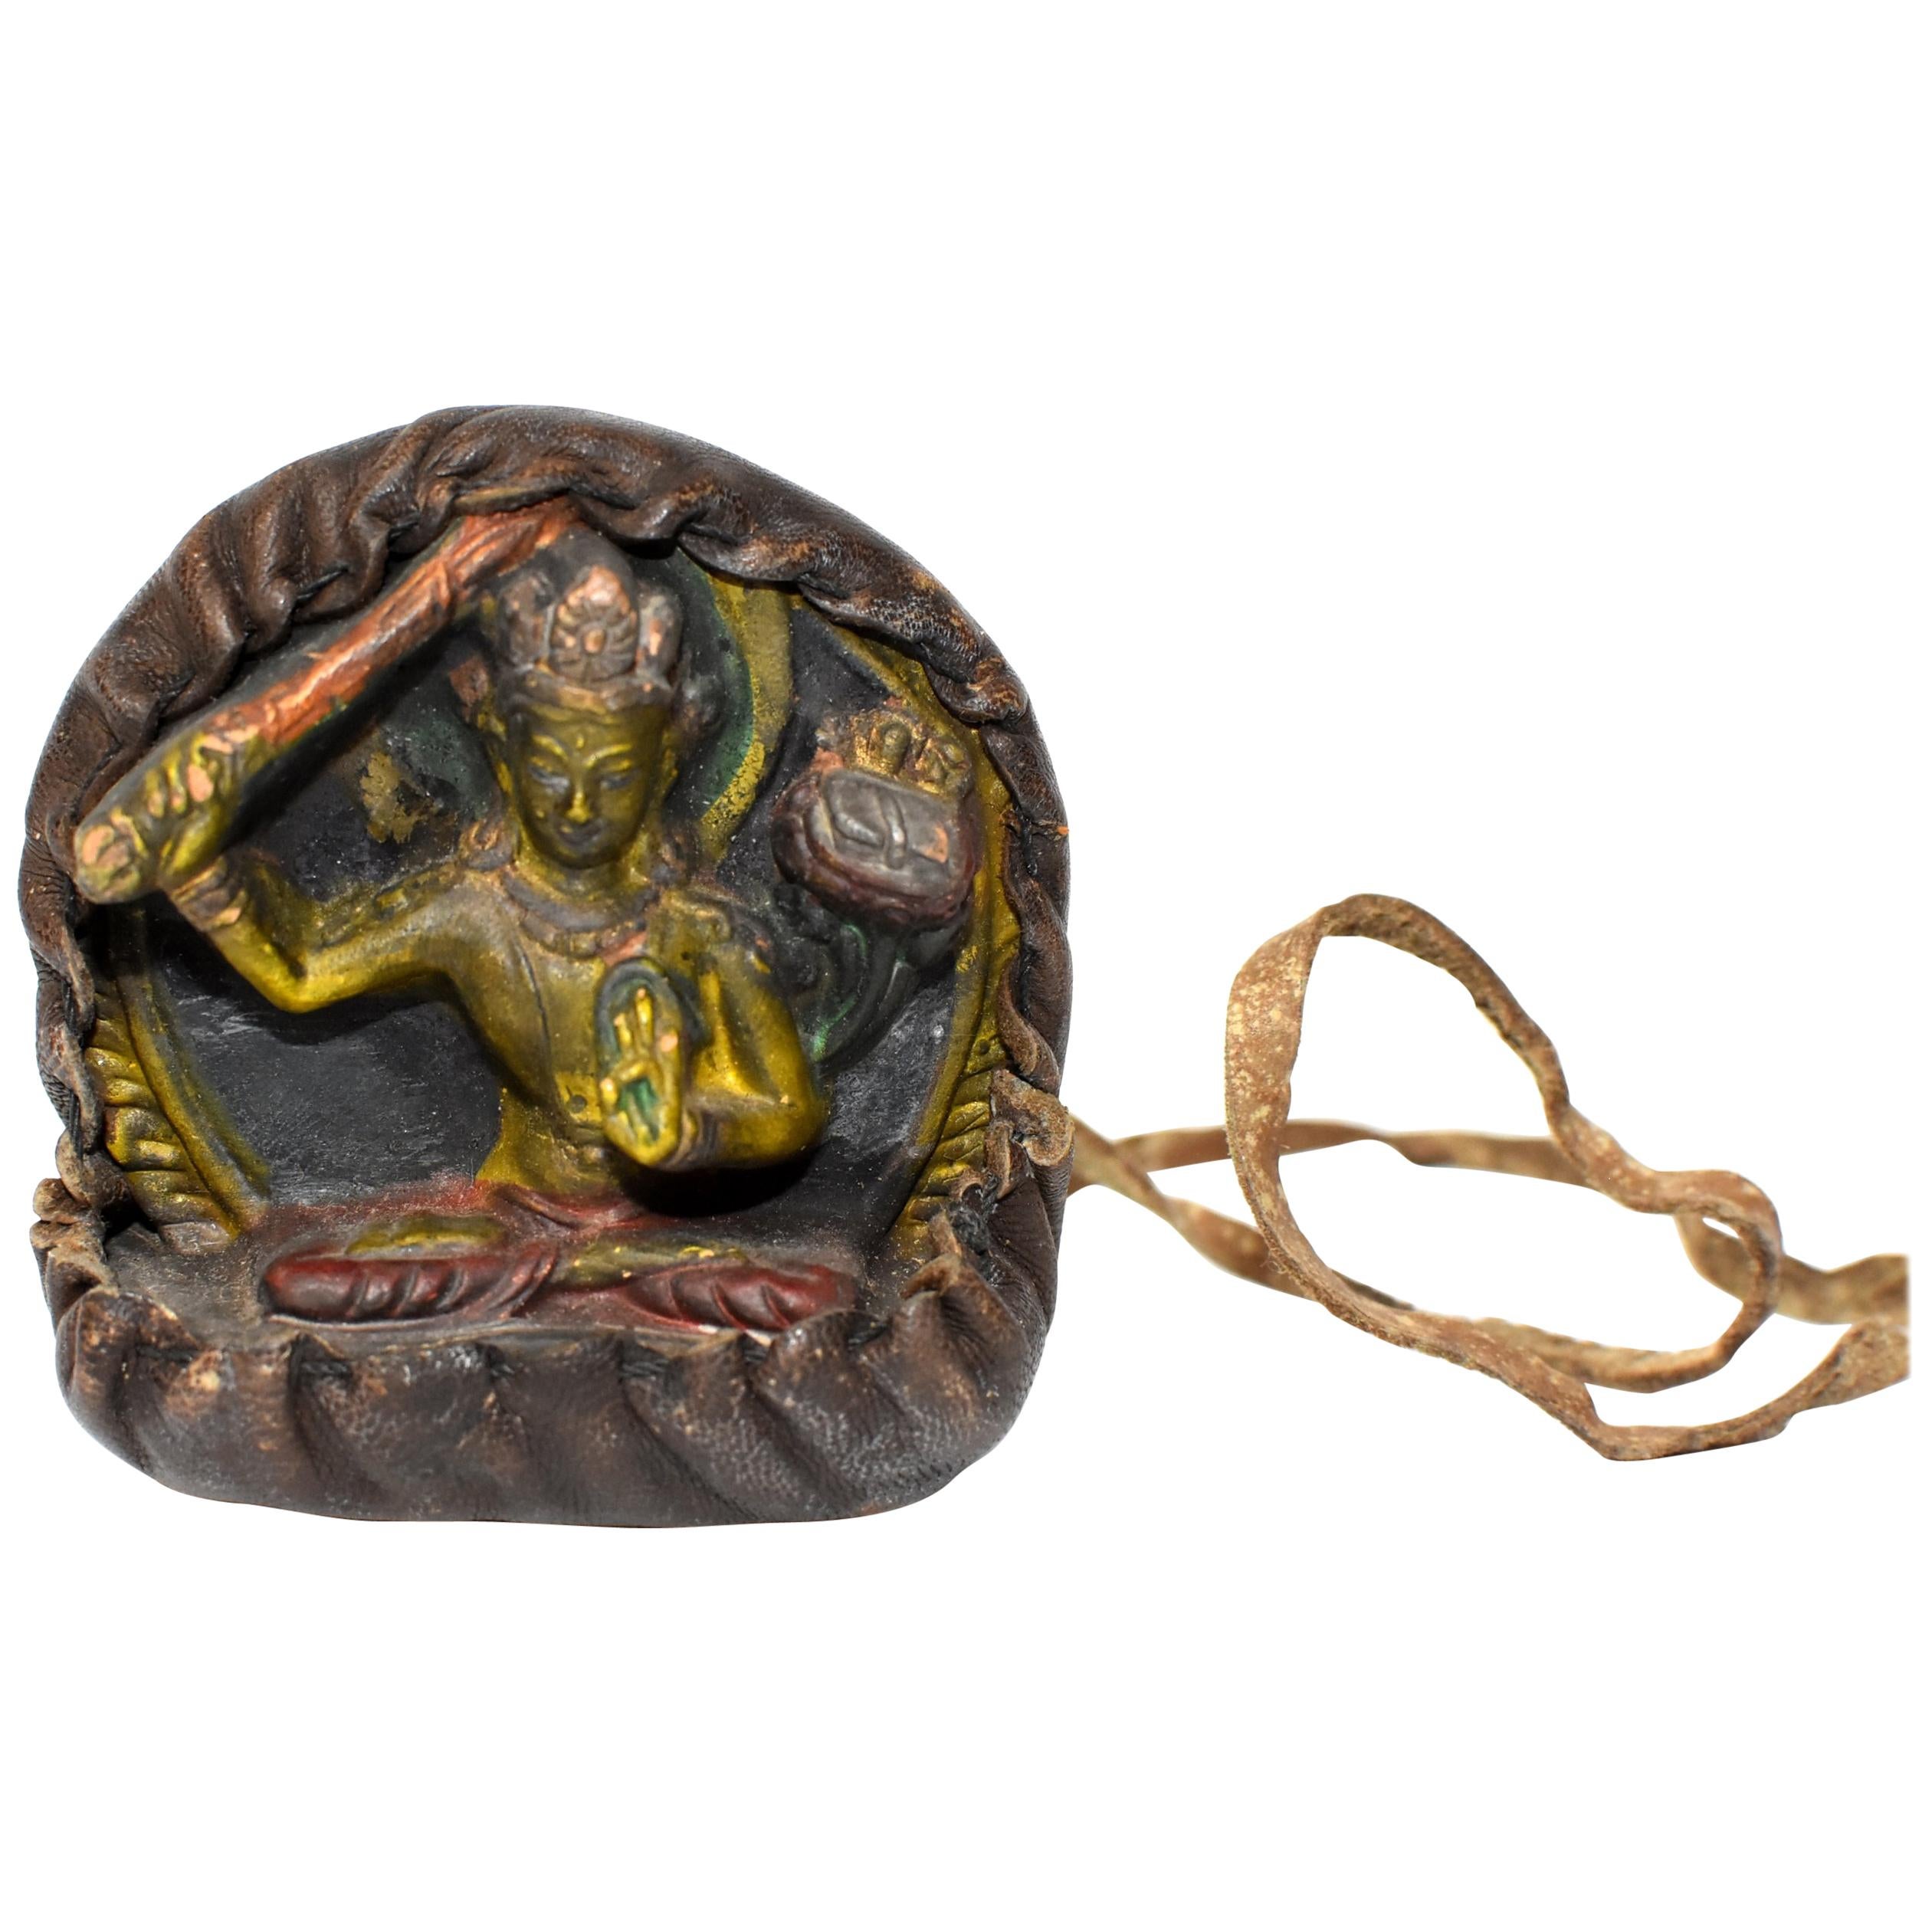 A Tibetan amulet featuring Tara encased in a handmade leather shrine. The Tara is made of terracotta, beautifully crafted displaying well defined facial features, decorated robe and a wonderful smile. Featured is the Tara holding sword, symbolizing